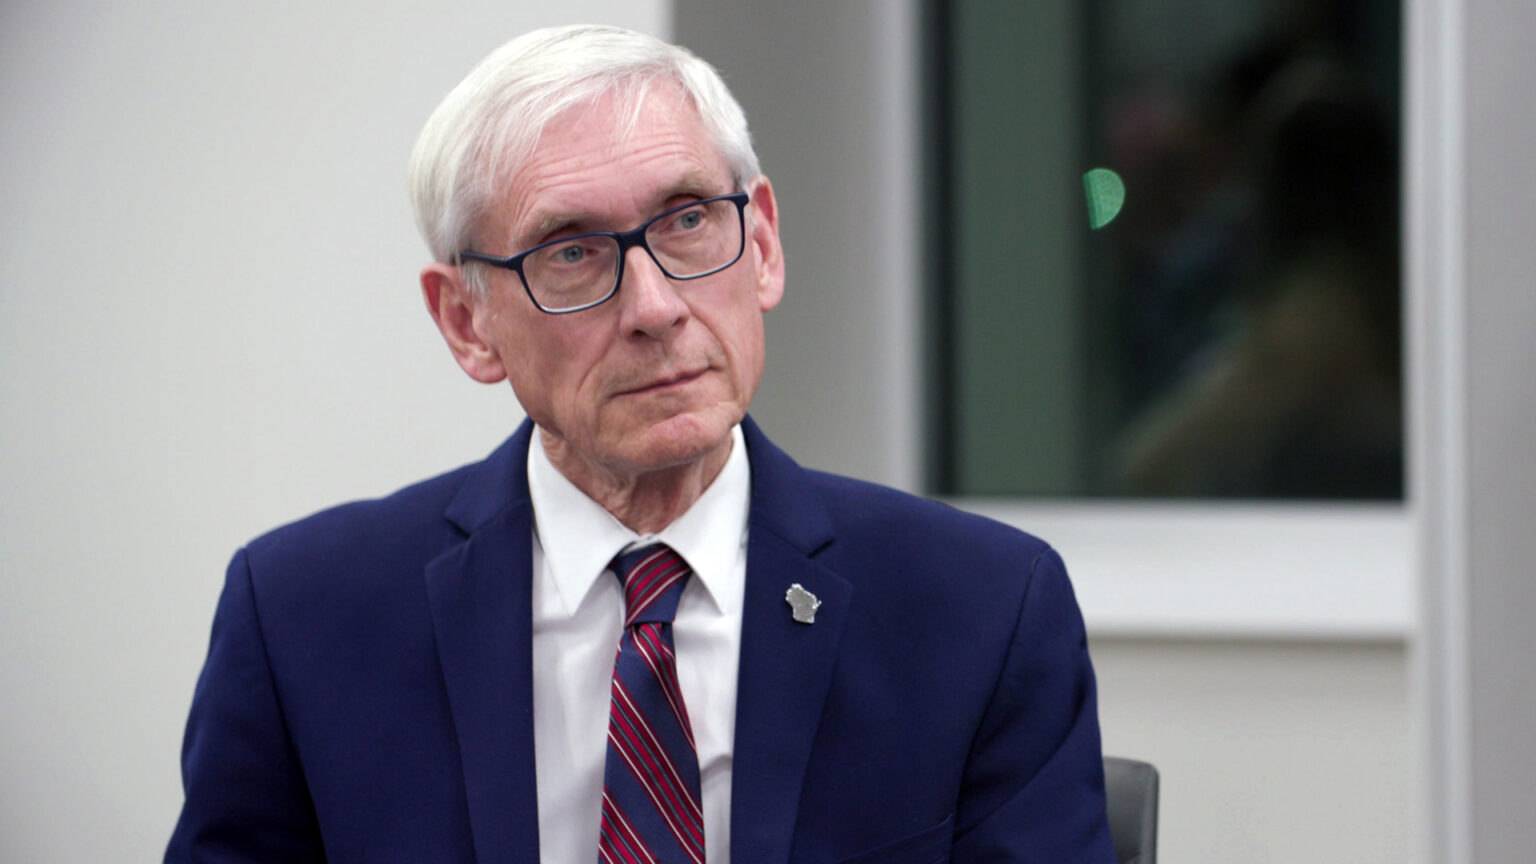 Tony Evers sits in a room with a window in the background and listens to another speaker.